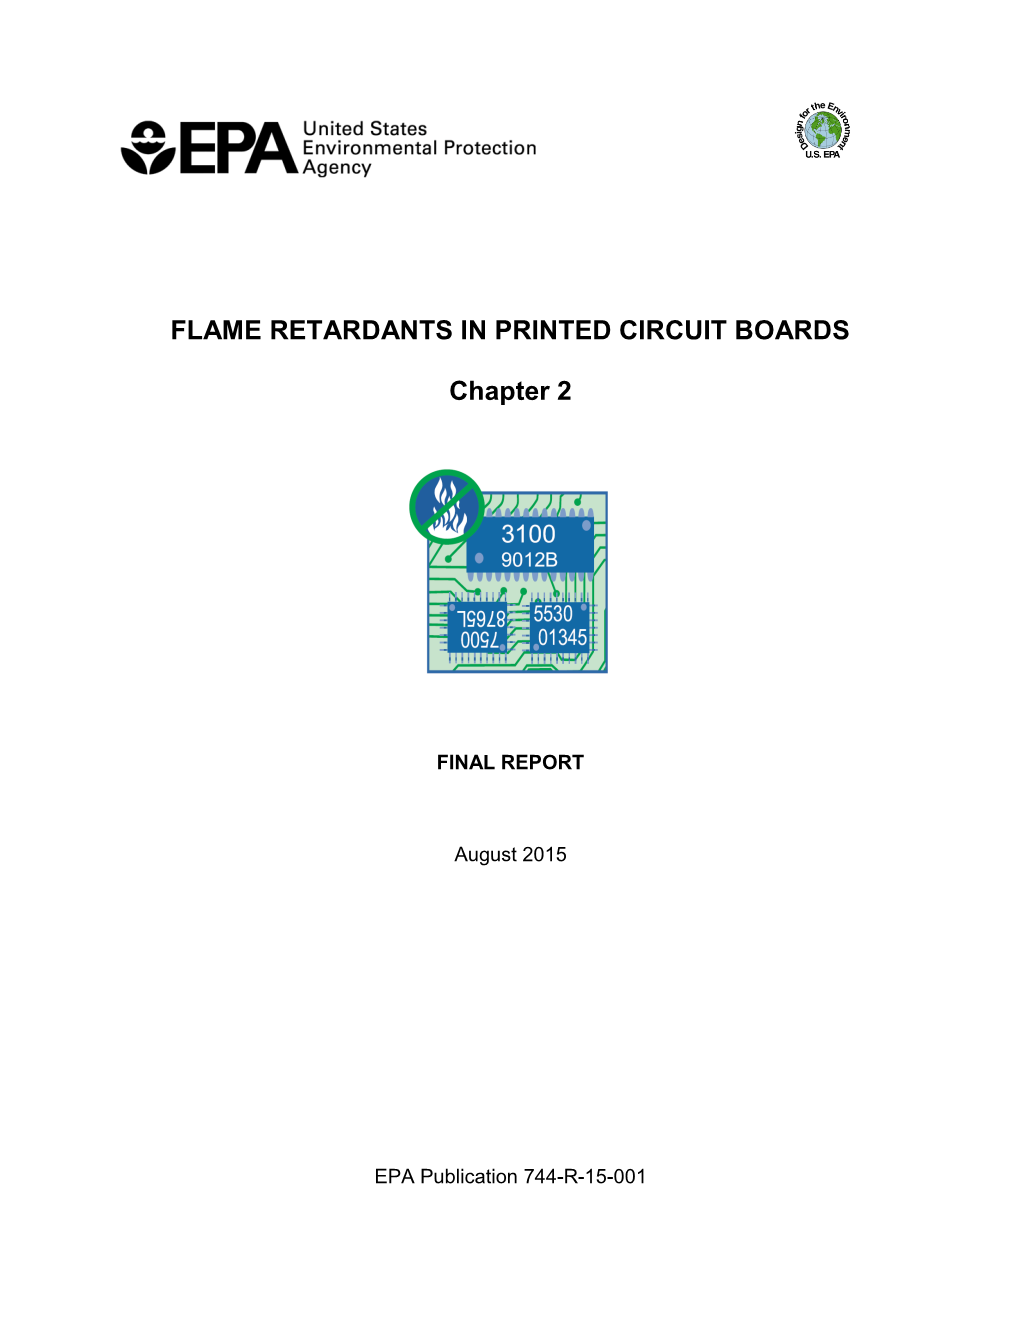 FLAME RETARDANTS in PRINTED CIRCUIT BOARDS Chapter 2